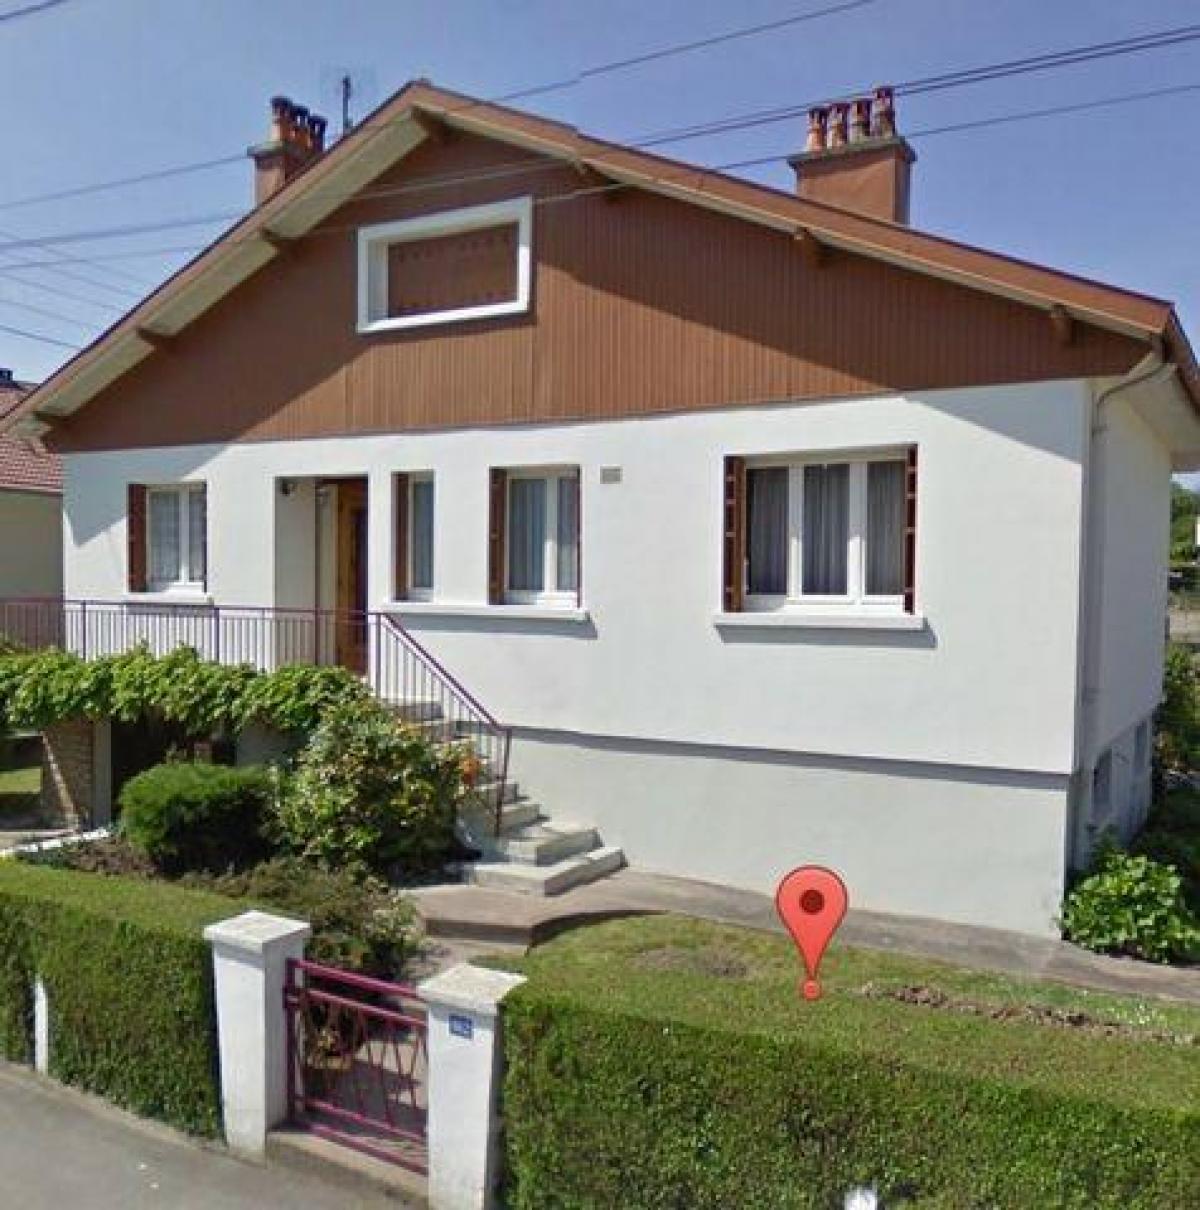 Picture of Home For Sale in Mirecourt, Lorraine, France